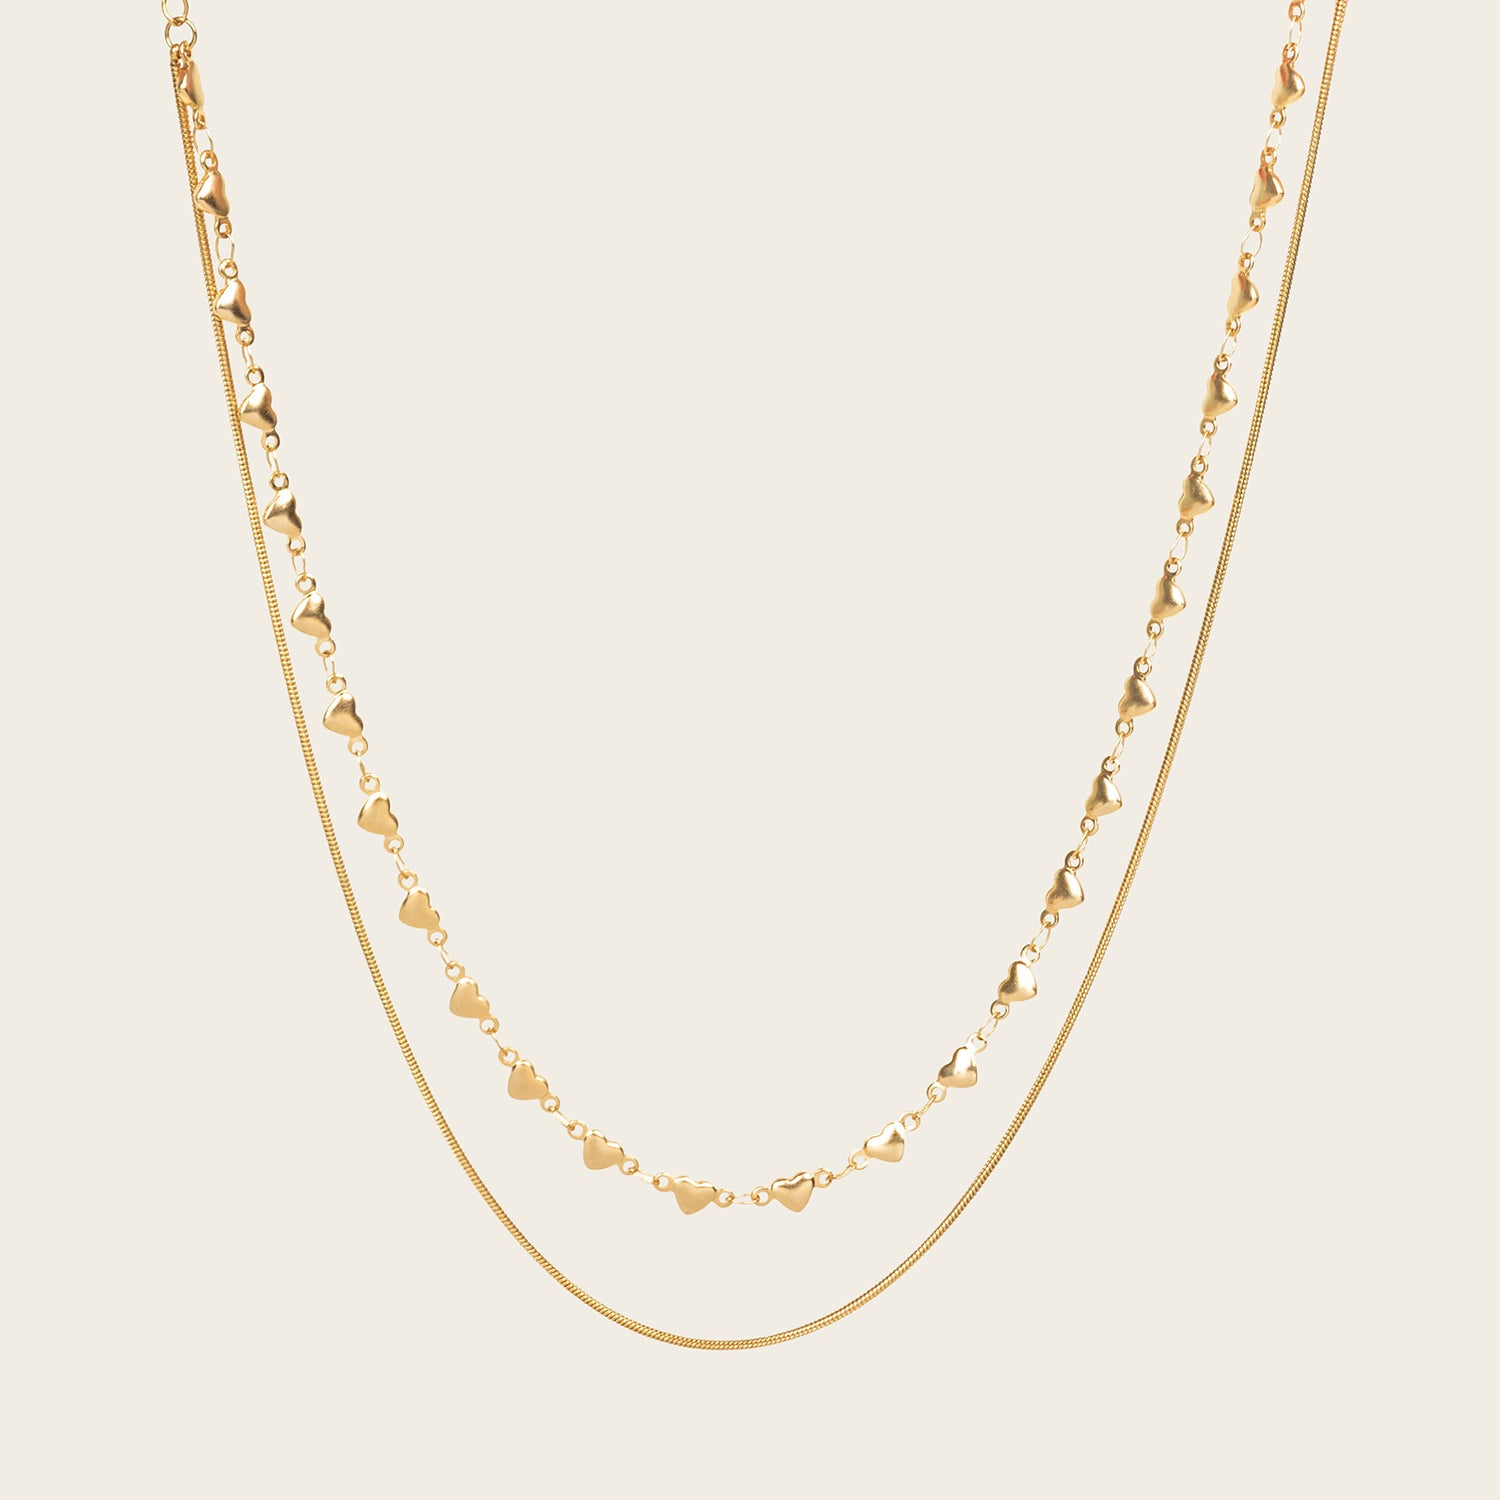 Image of the Heart Chain Double Layered Necklace is crafted from 14K Gold Plated Stainless Steel, which is water resistant and non-tarnishing. The necklace can be adjusted for a perfect fit. Please Note: This product is one necklace.